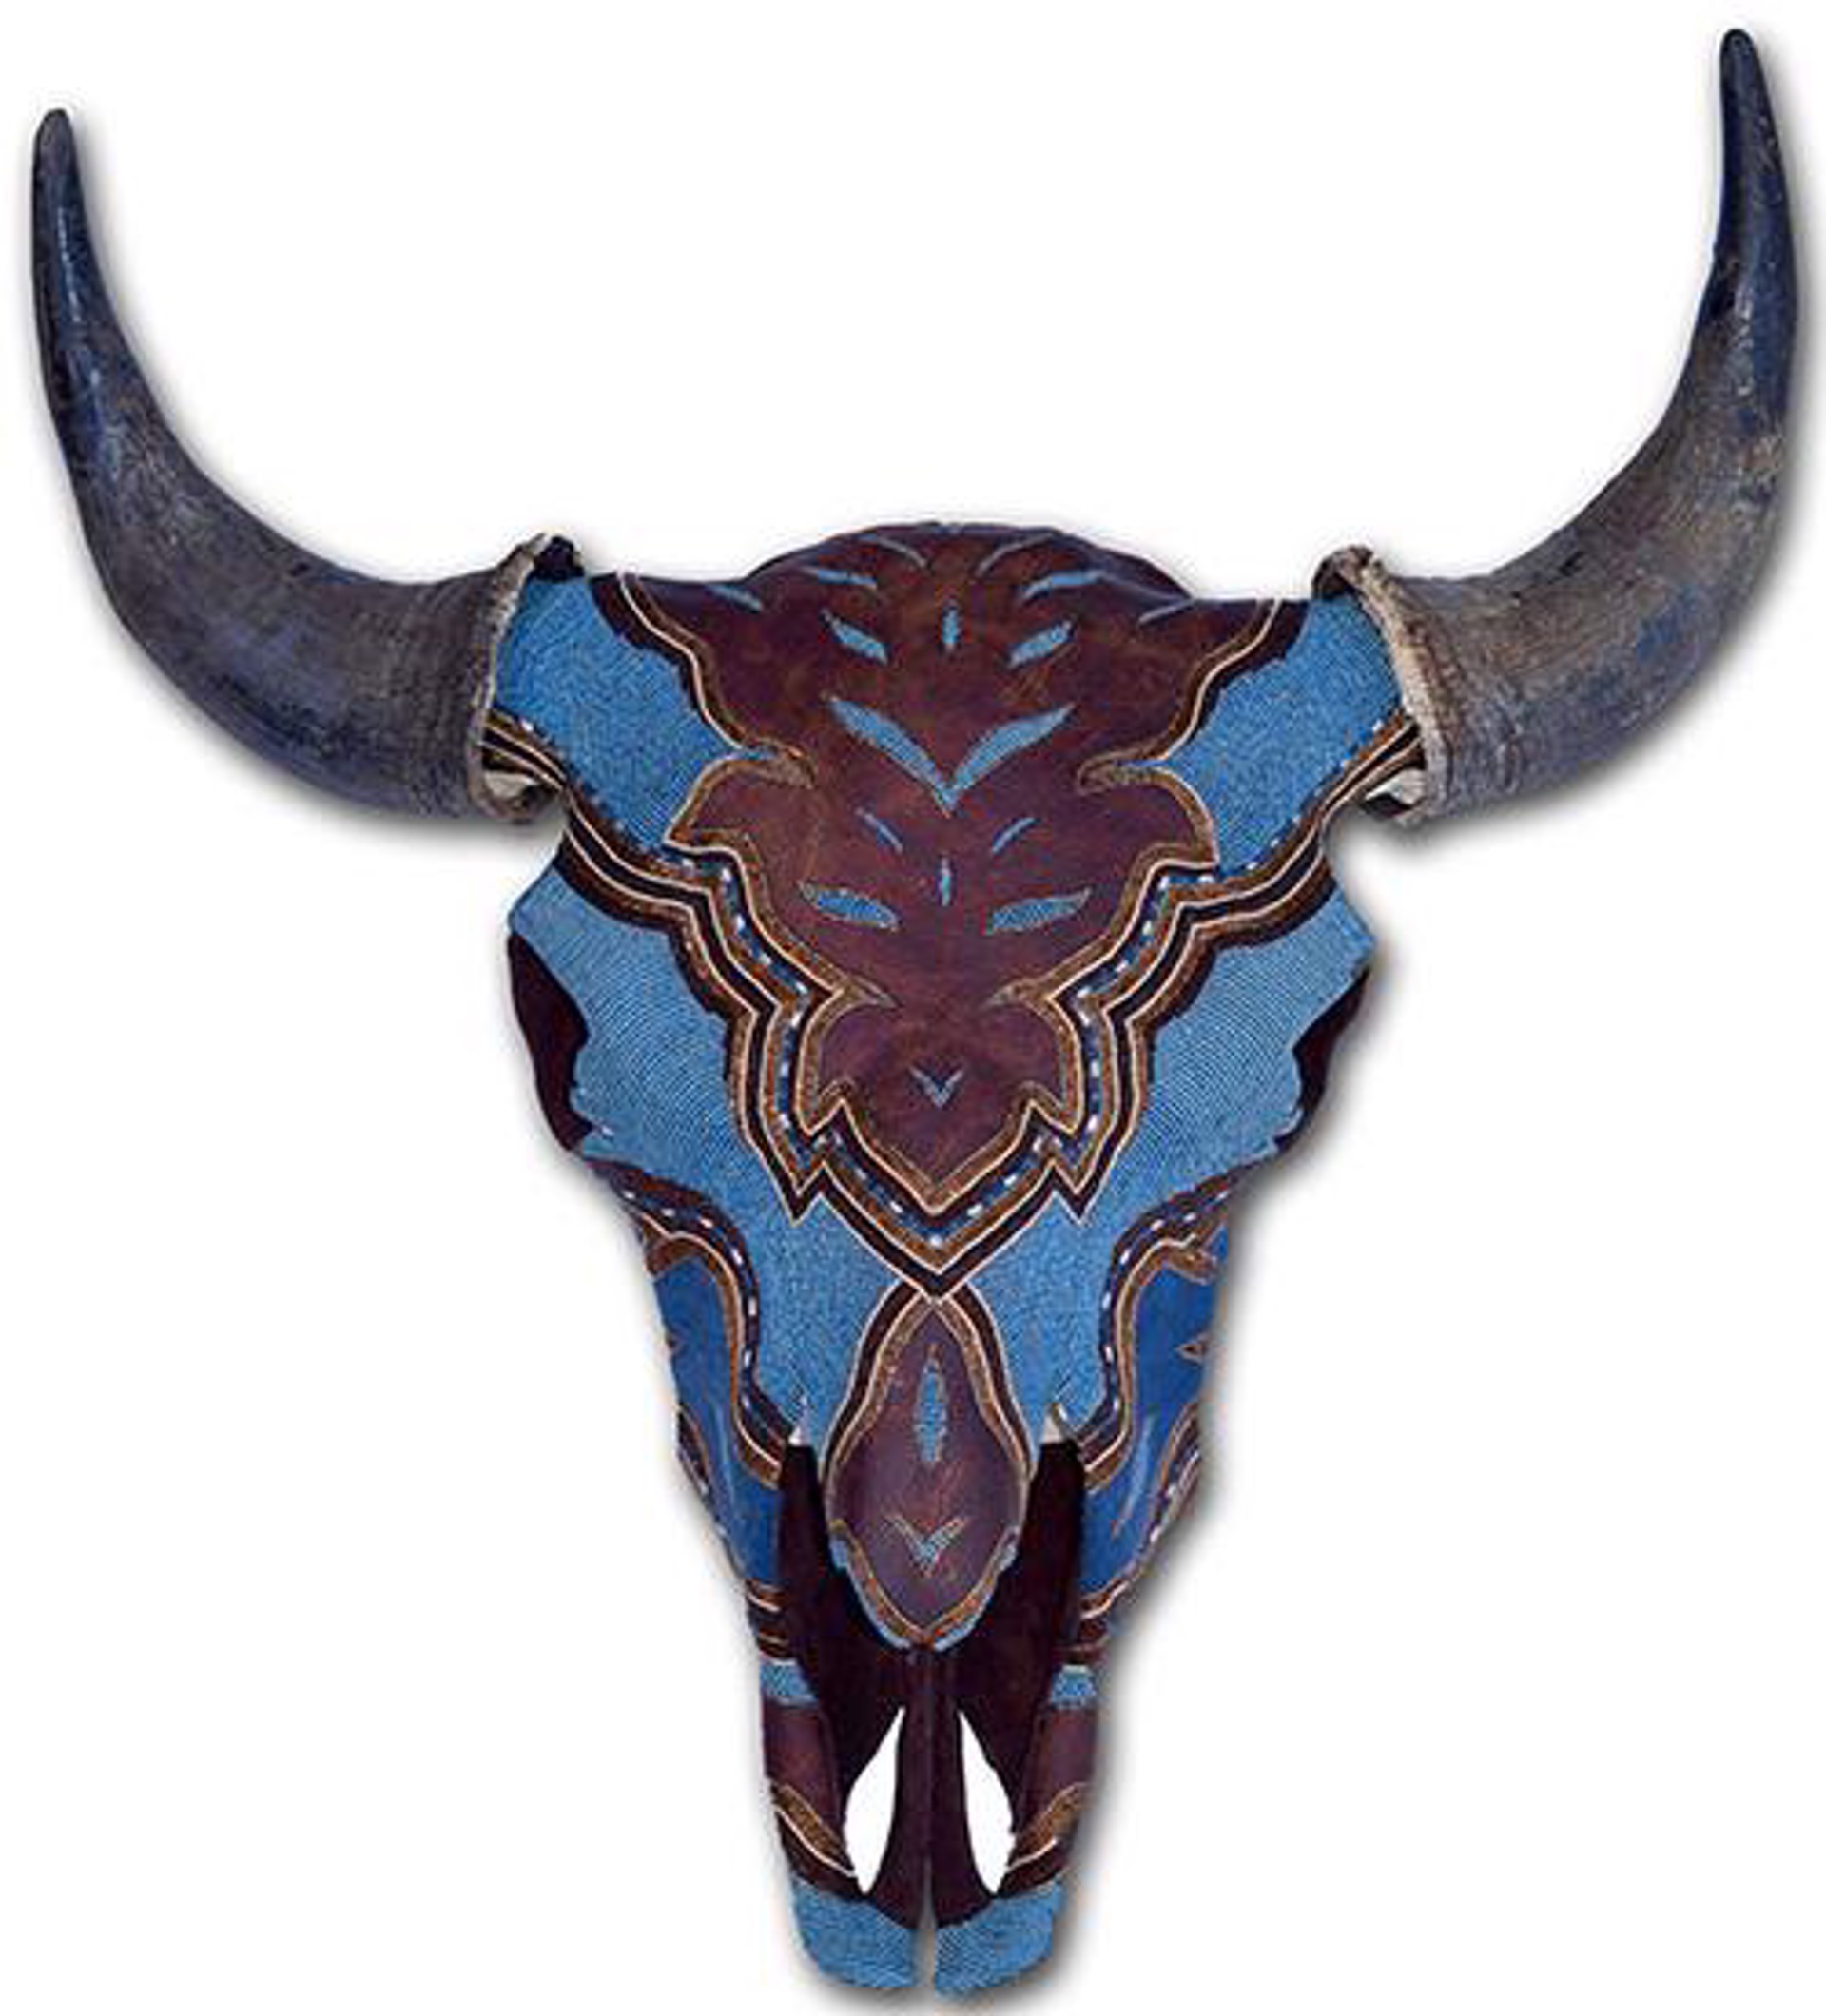 Distressed Leather Buffalo by Ali Rouse